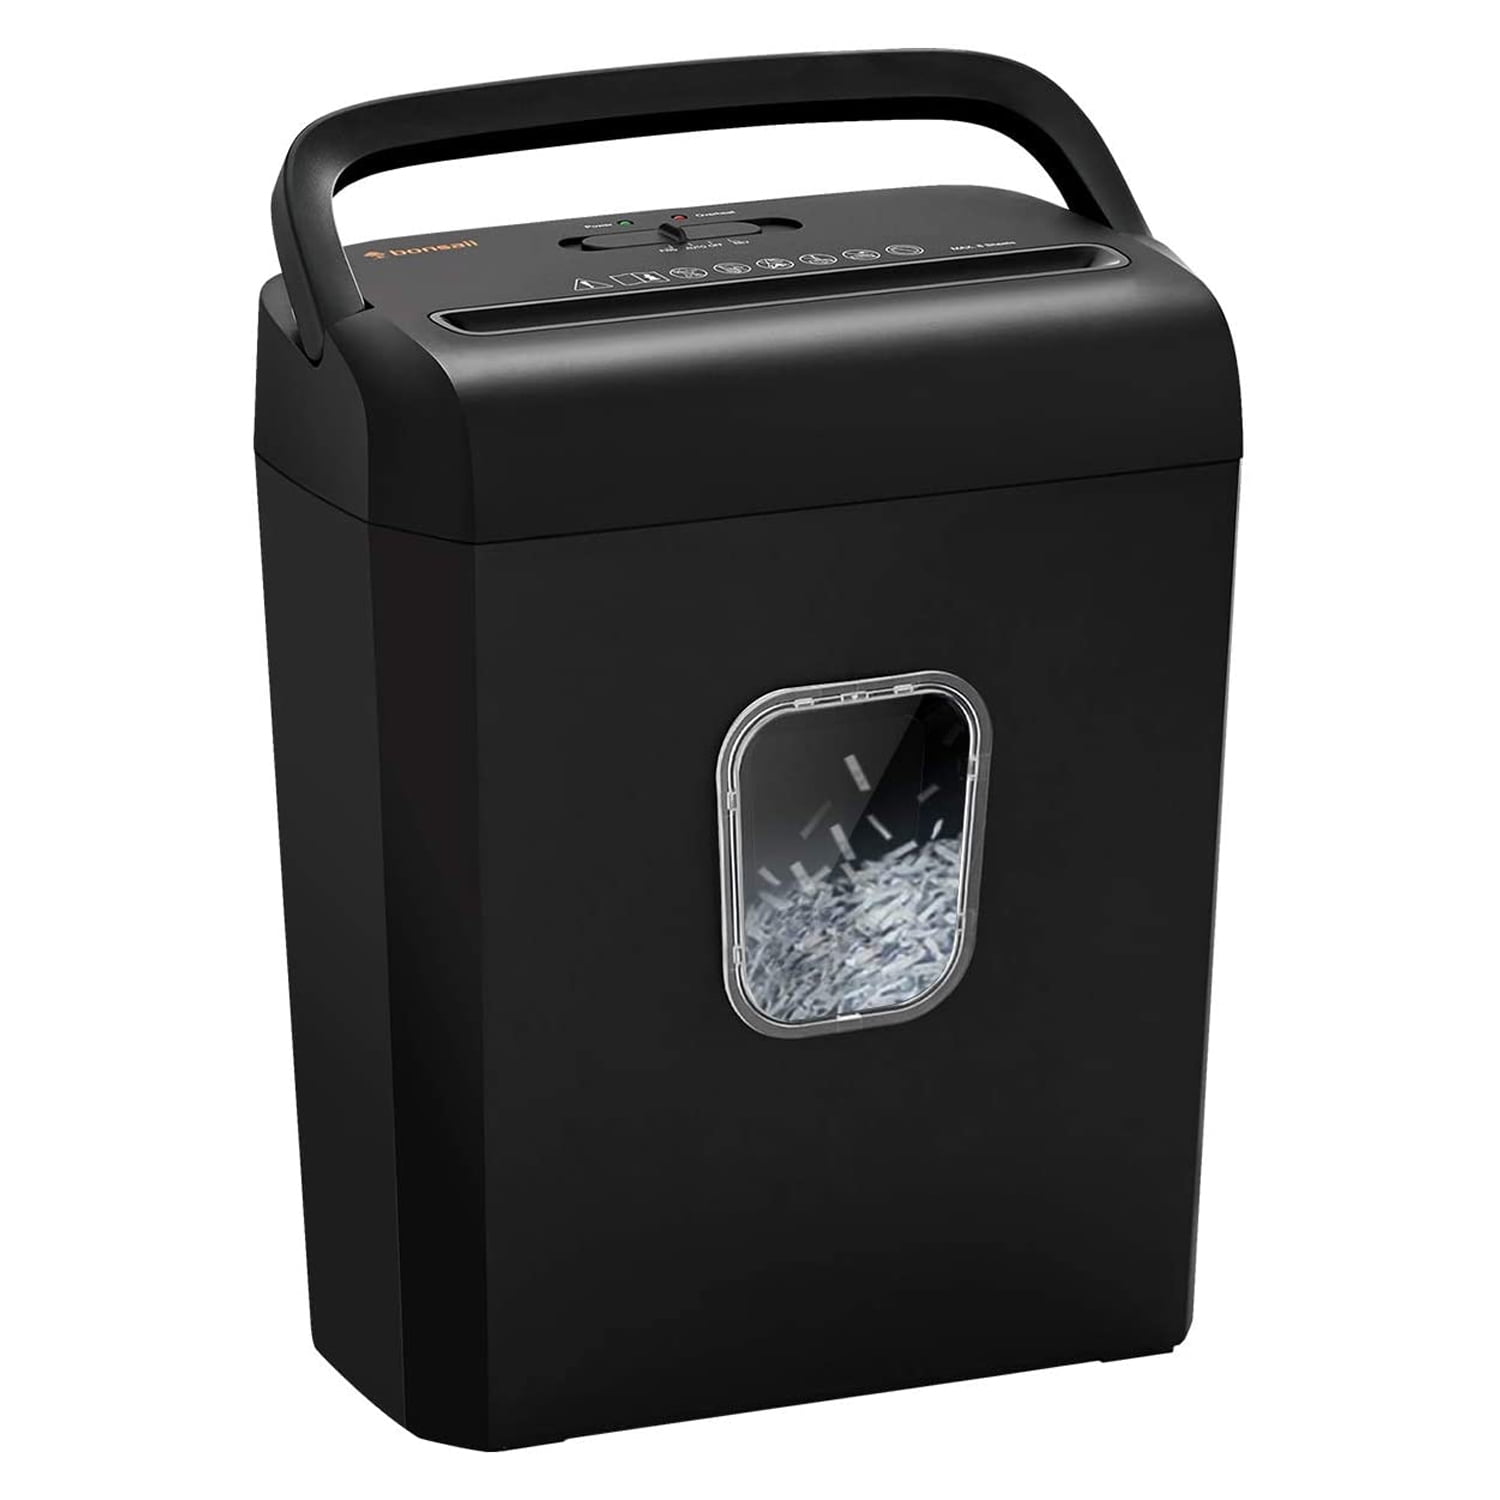 Bonsaii Paper Shredder for Home Use,6-Sheet Crosscut Paper and Credit Card  Shredder for Home Office with Handle for Document,Mail,Staple,Clip-3.4 Gal